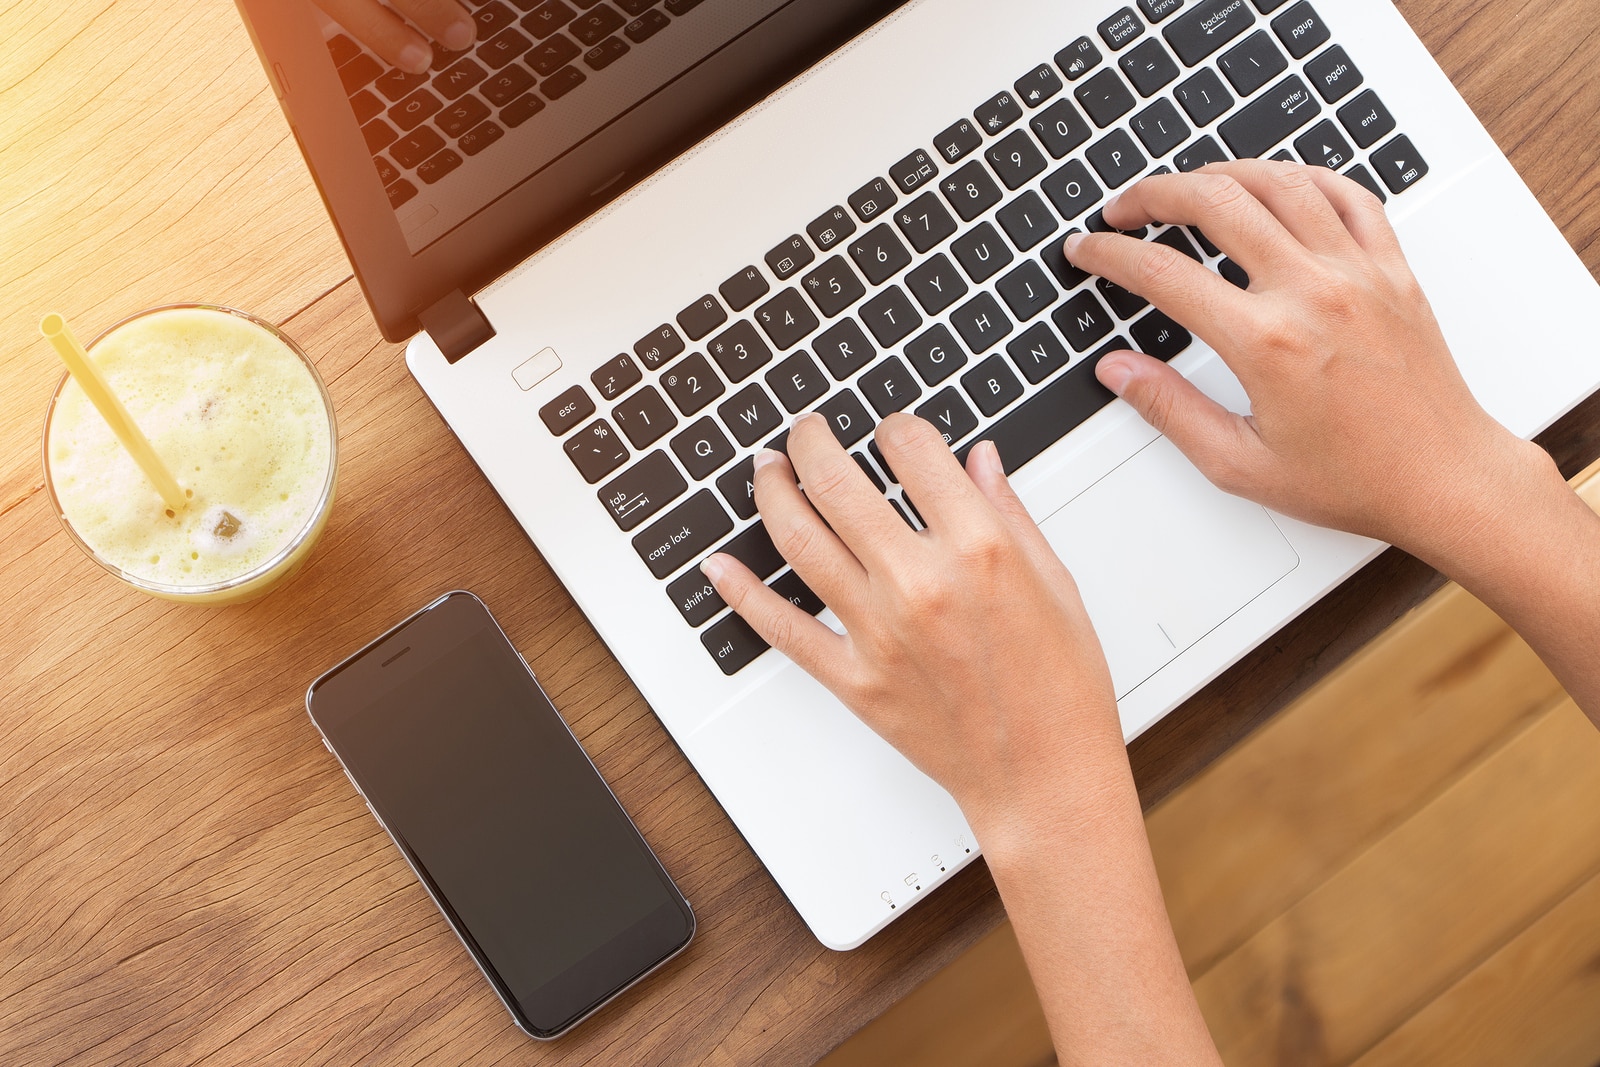 Photo of hands typing on a laptop keyboard, a phone is next to the laptop